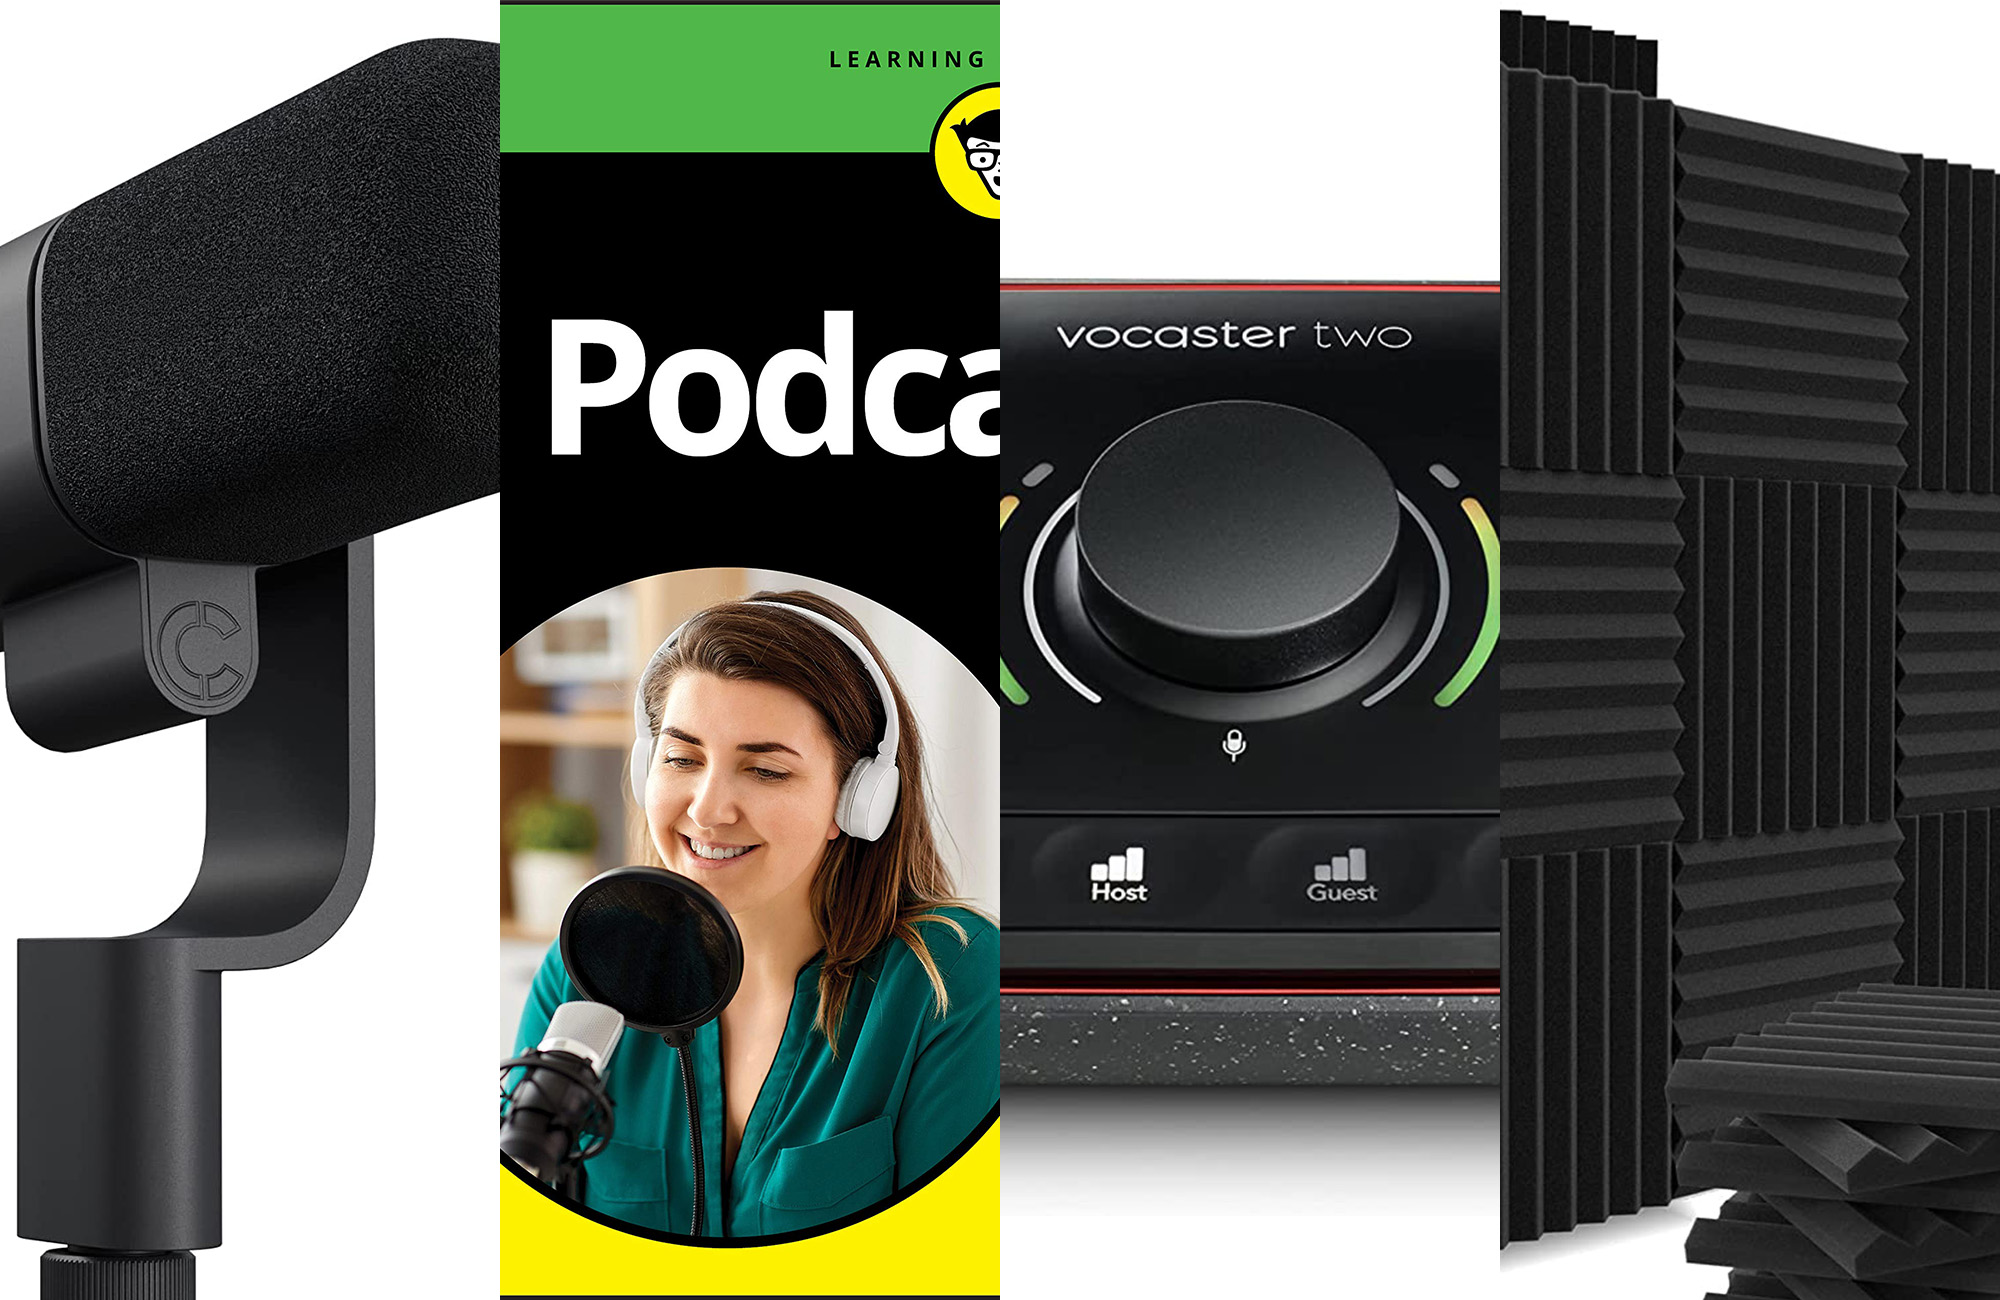 The best gifts to speak to podcast lovers’ souls